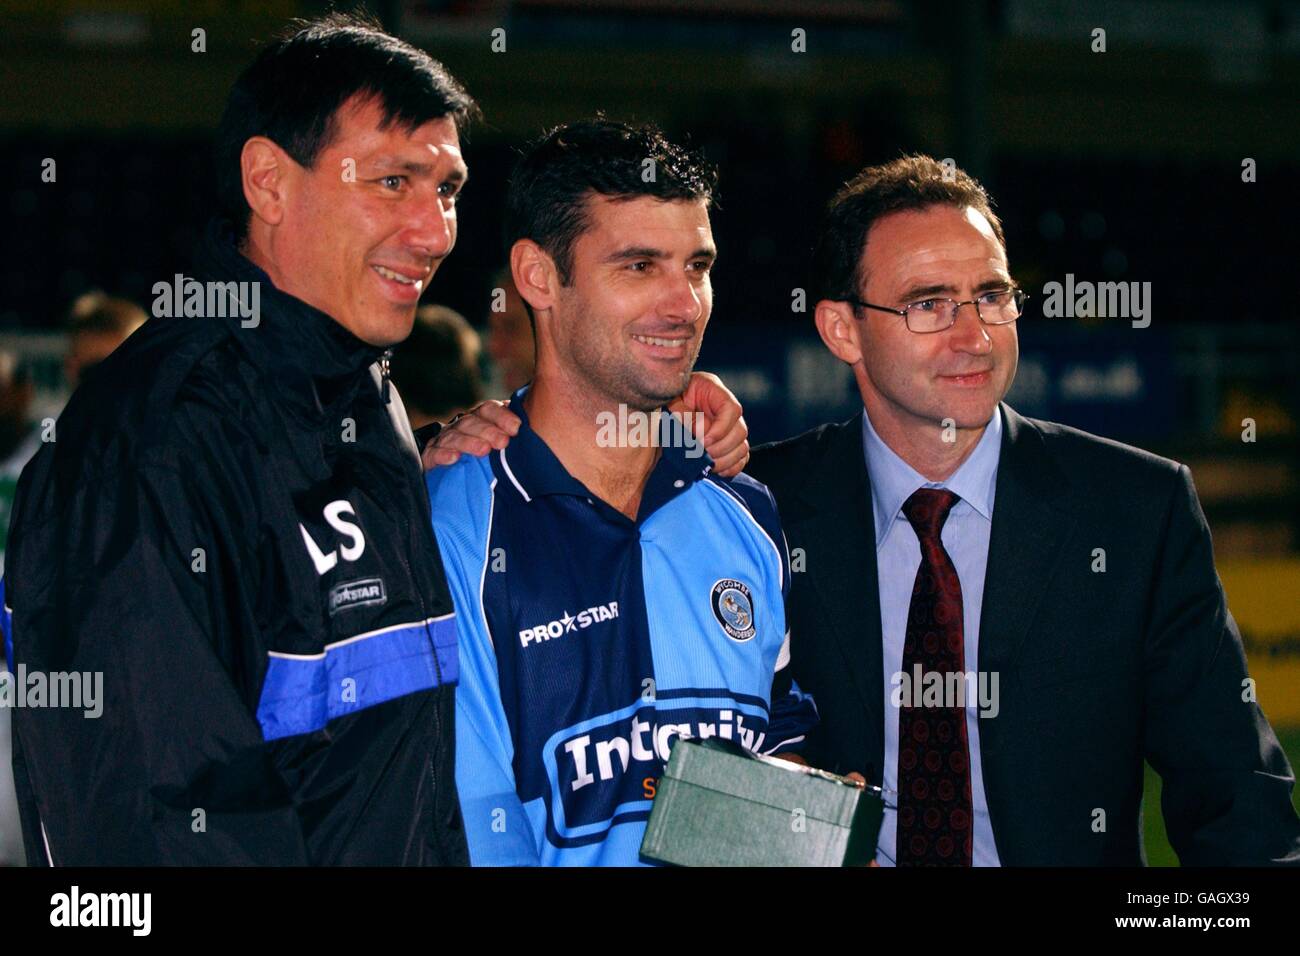 Wycombe Wanderers' Jason Cousins receives a gift from his manager Lawrie Sanchez and Celtic's manager Martin O'Neill Stock Photo